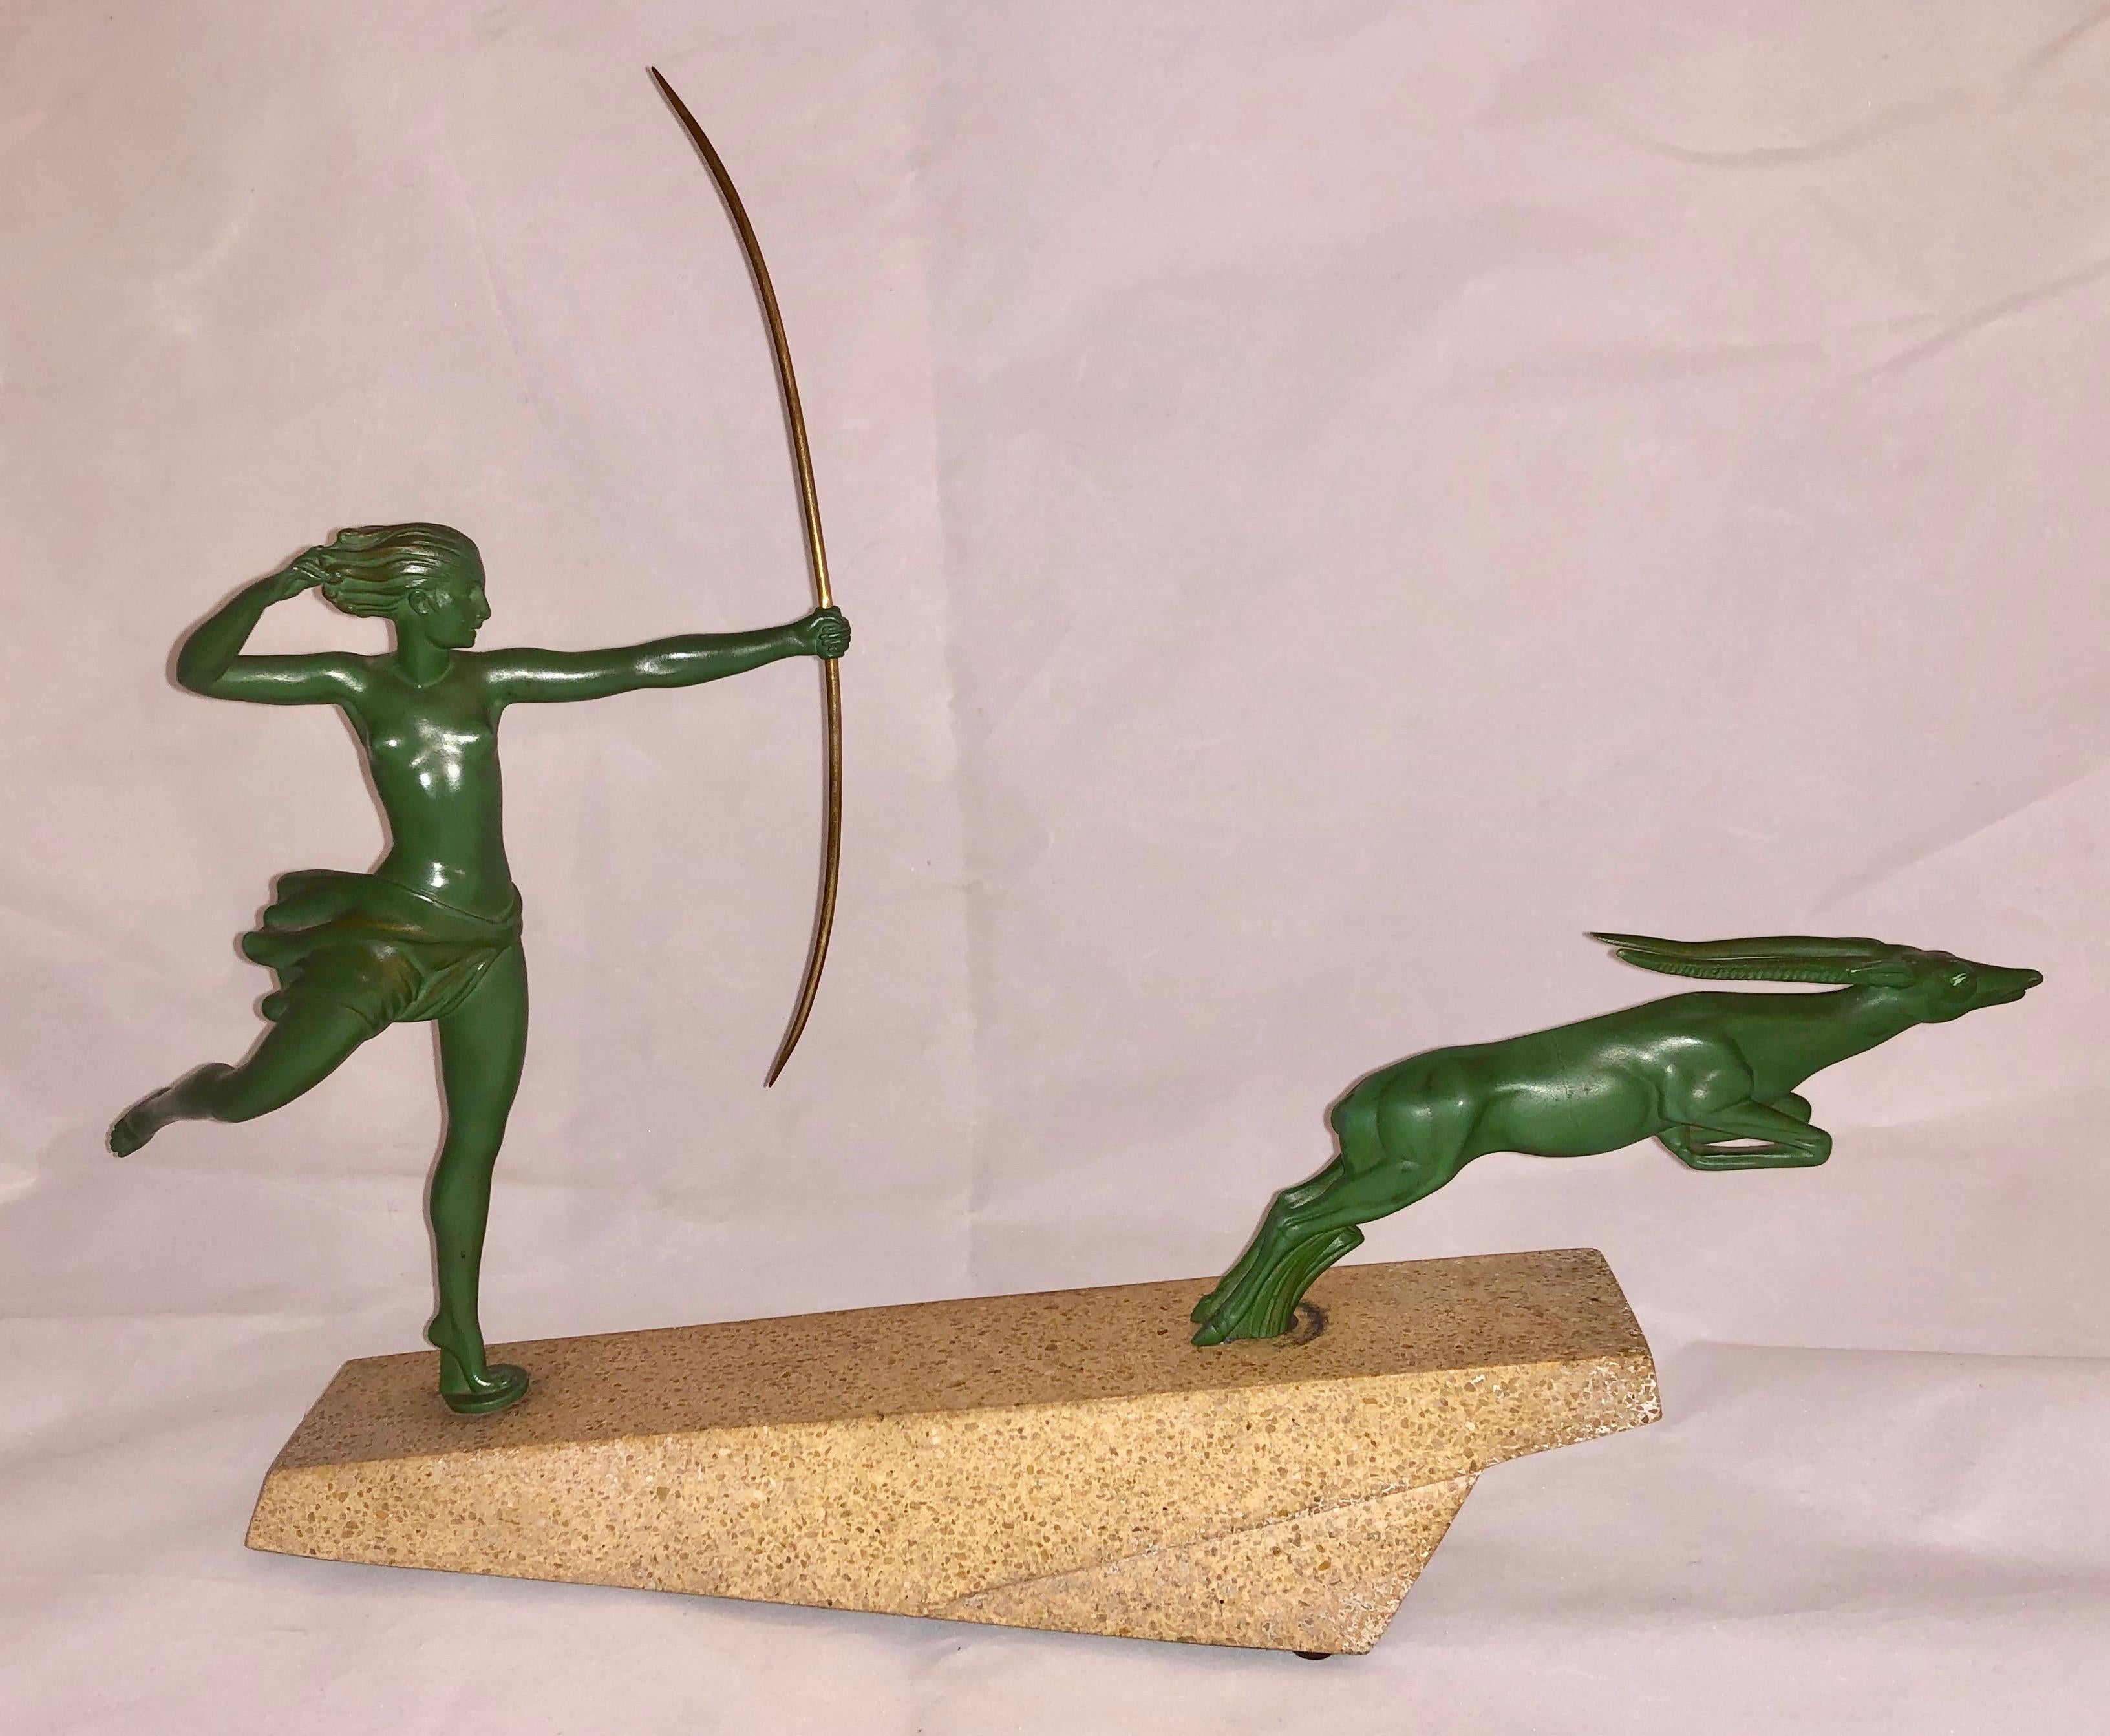 This is Diana the Huntress, a theme often repeated in Art Deco folklore. What makes this piece so spectacular: It has the style, small size and all the elements. The quality is of the best petite bronze metal with special green patina, very heavy